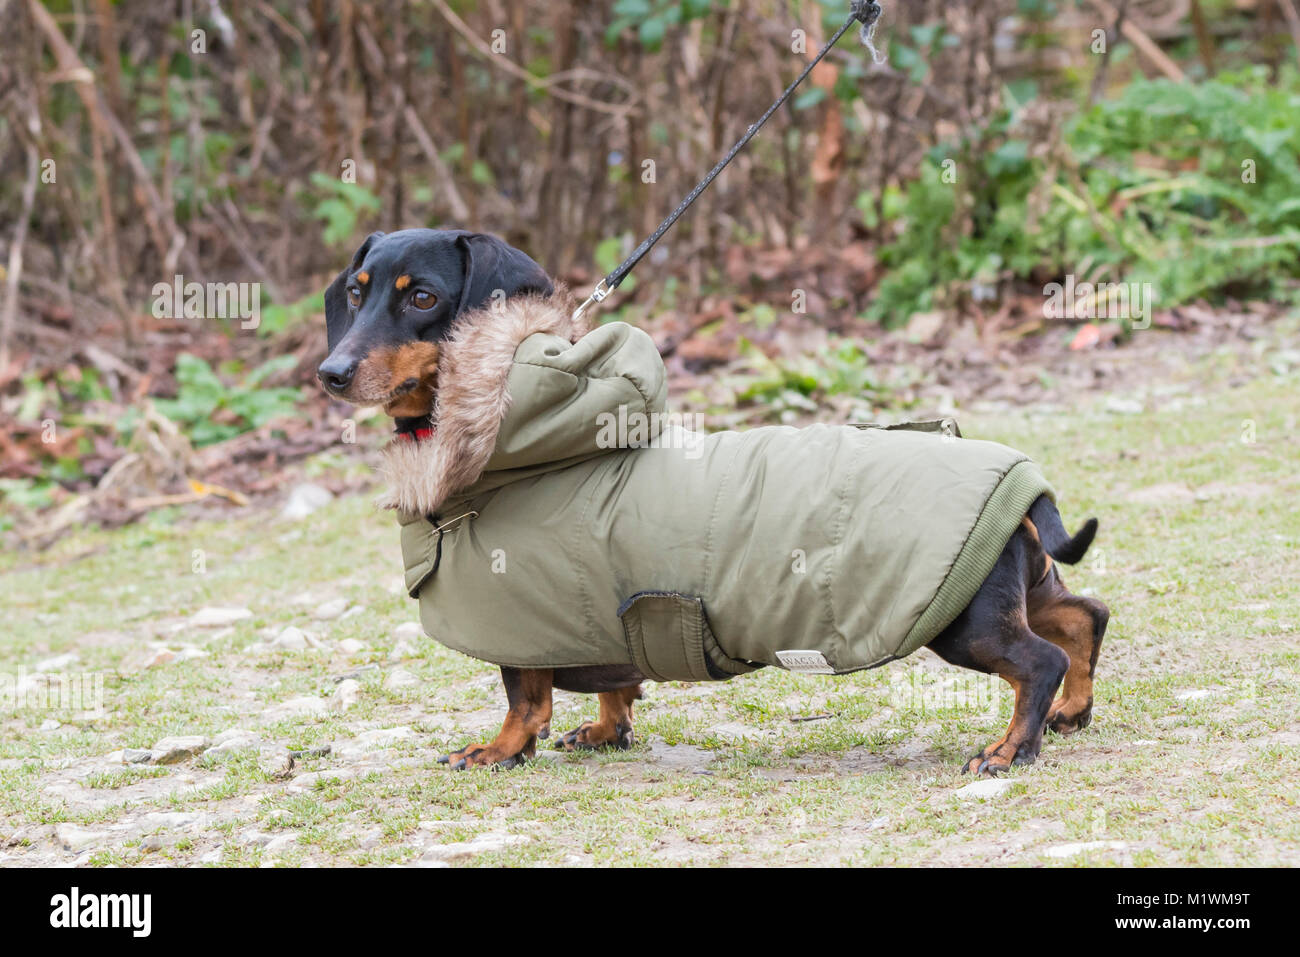 A dog wearing a Winter coat in the UK. Stock Photo